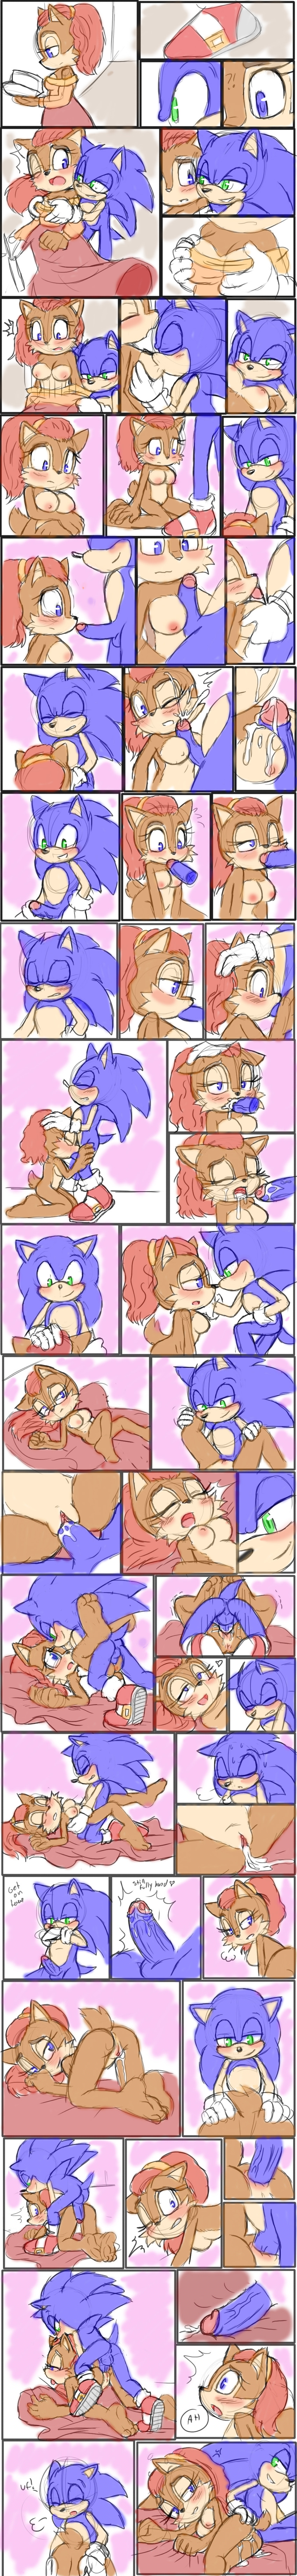 alicia acorn and sonic the hedgehog (sonic the hedgehog (archie) and etc) created by angelofhapiness